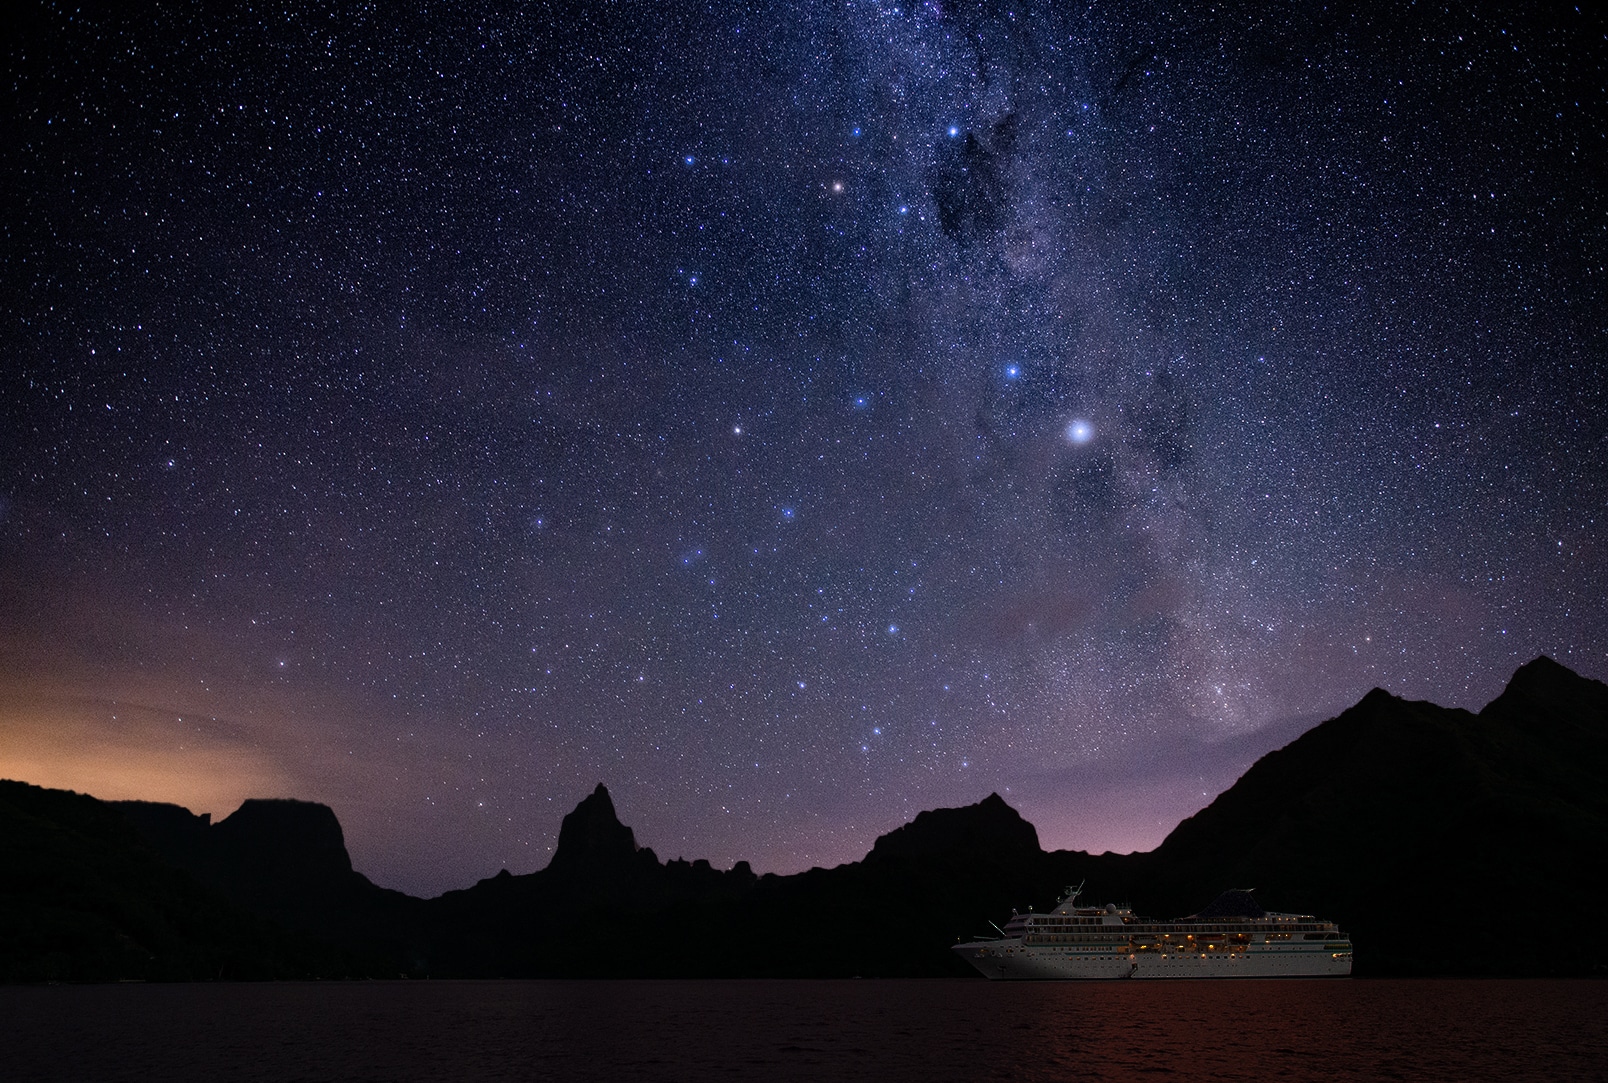 Quietly ensconced amidst the legendary isles of French Polynesia, the m/s Paul Gauguin is your perfect host for gazing up at stars and planets, constellations and the cosmos.